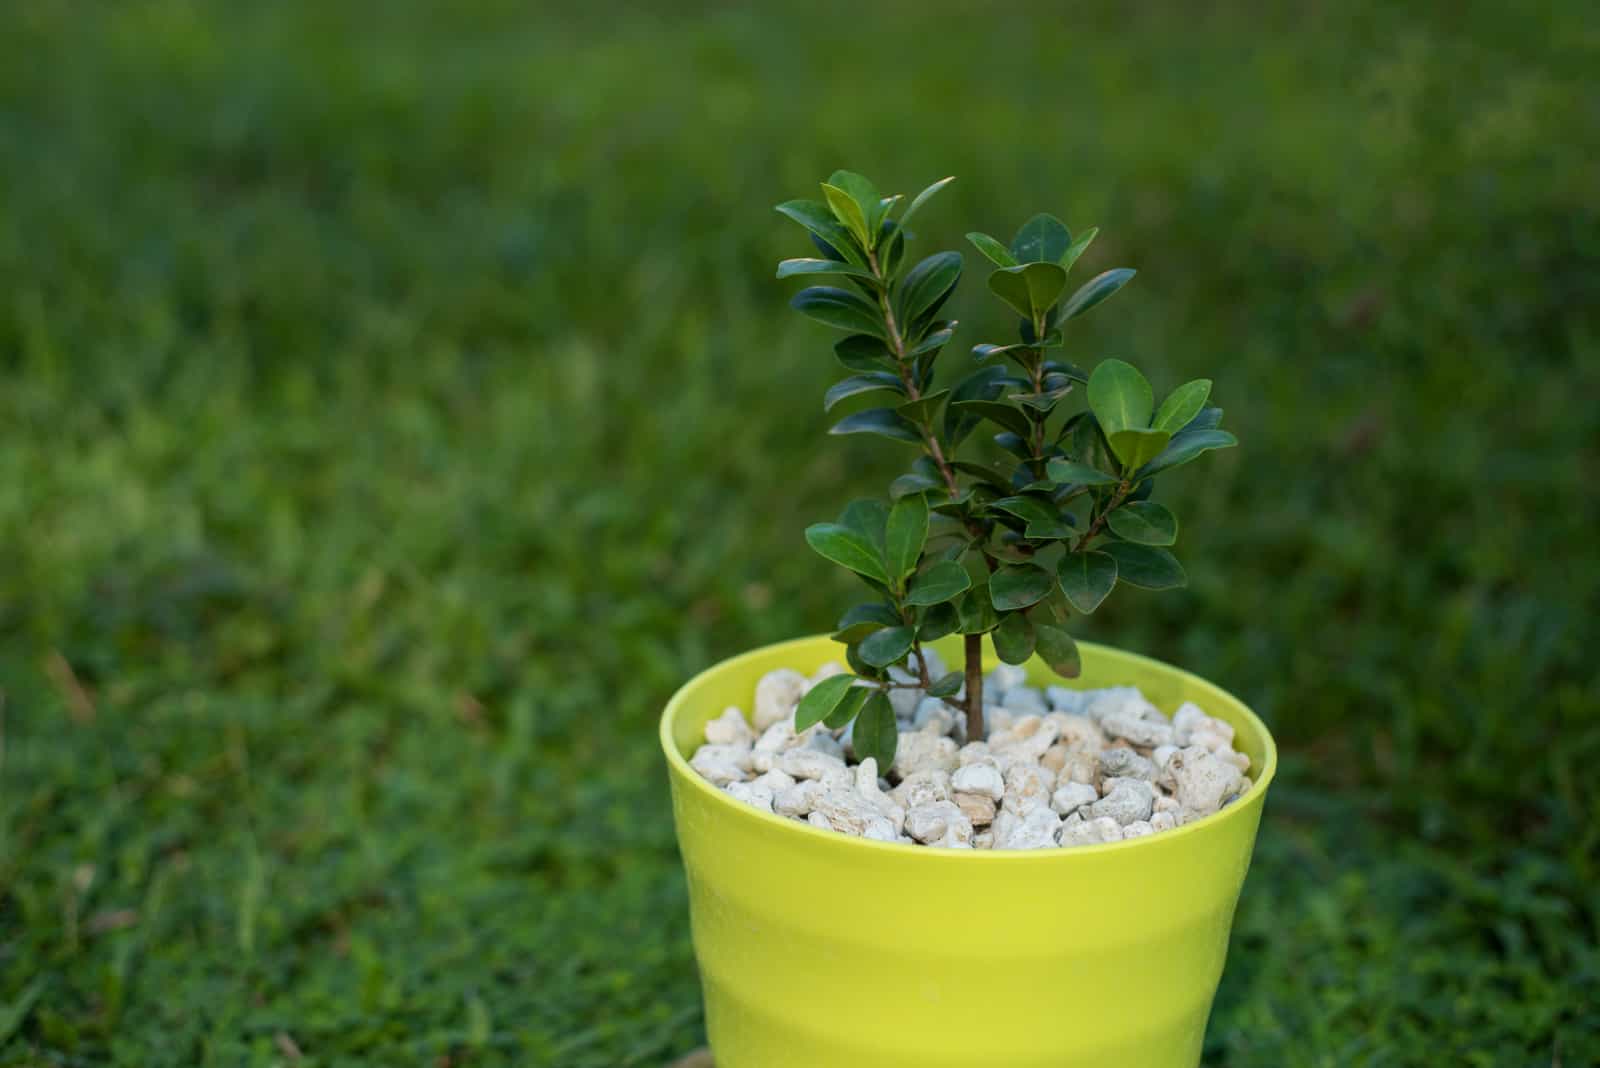 A small green plant in a yellow pot with white stones